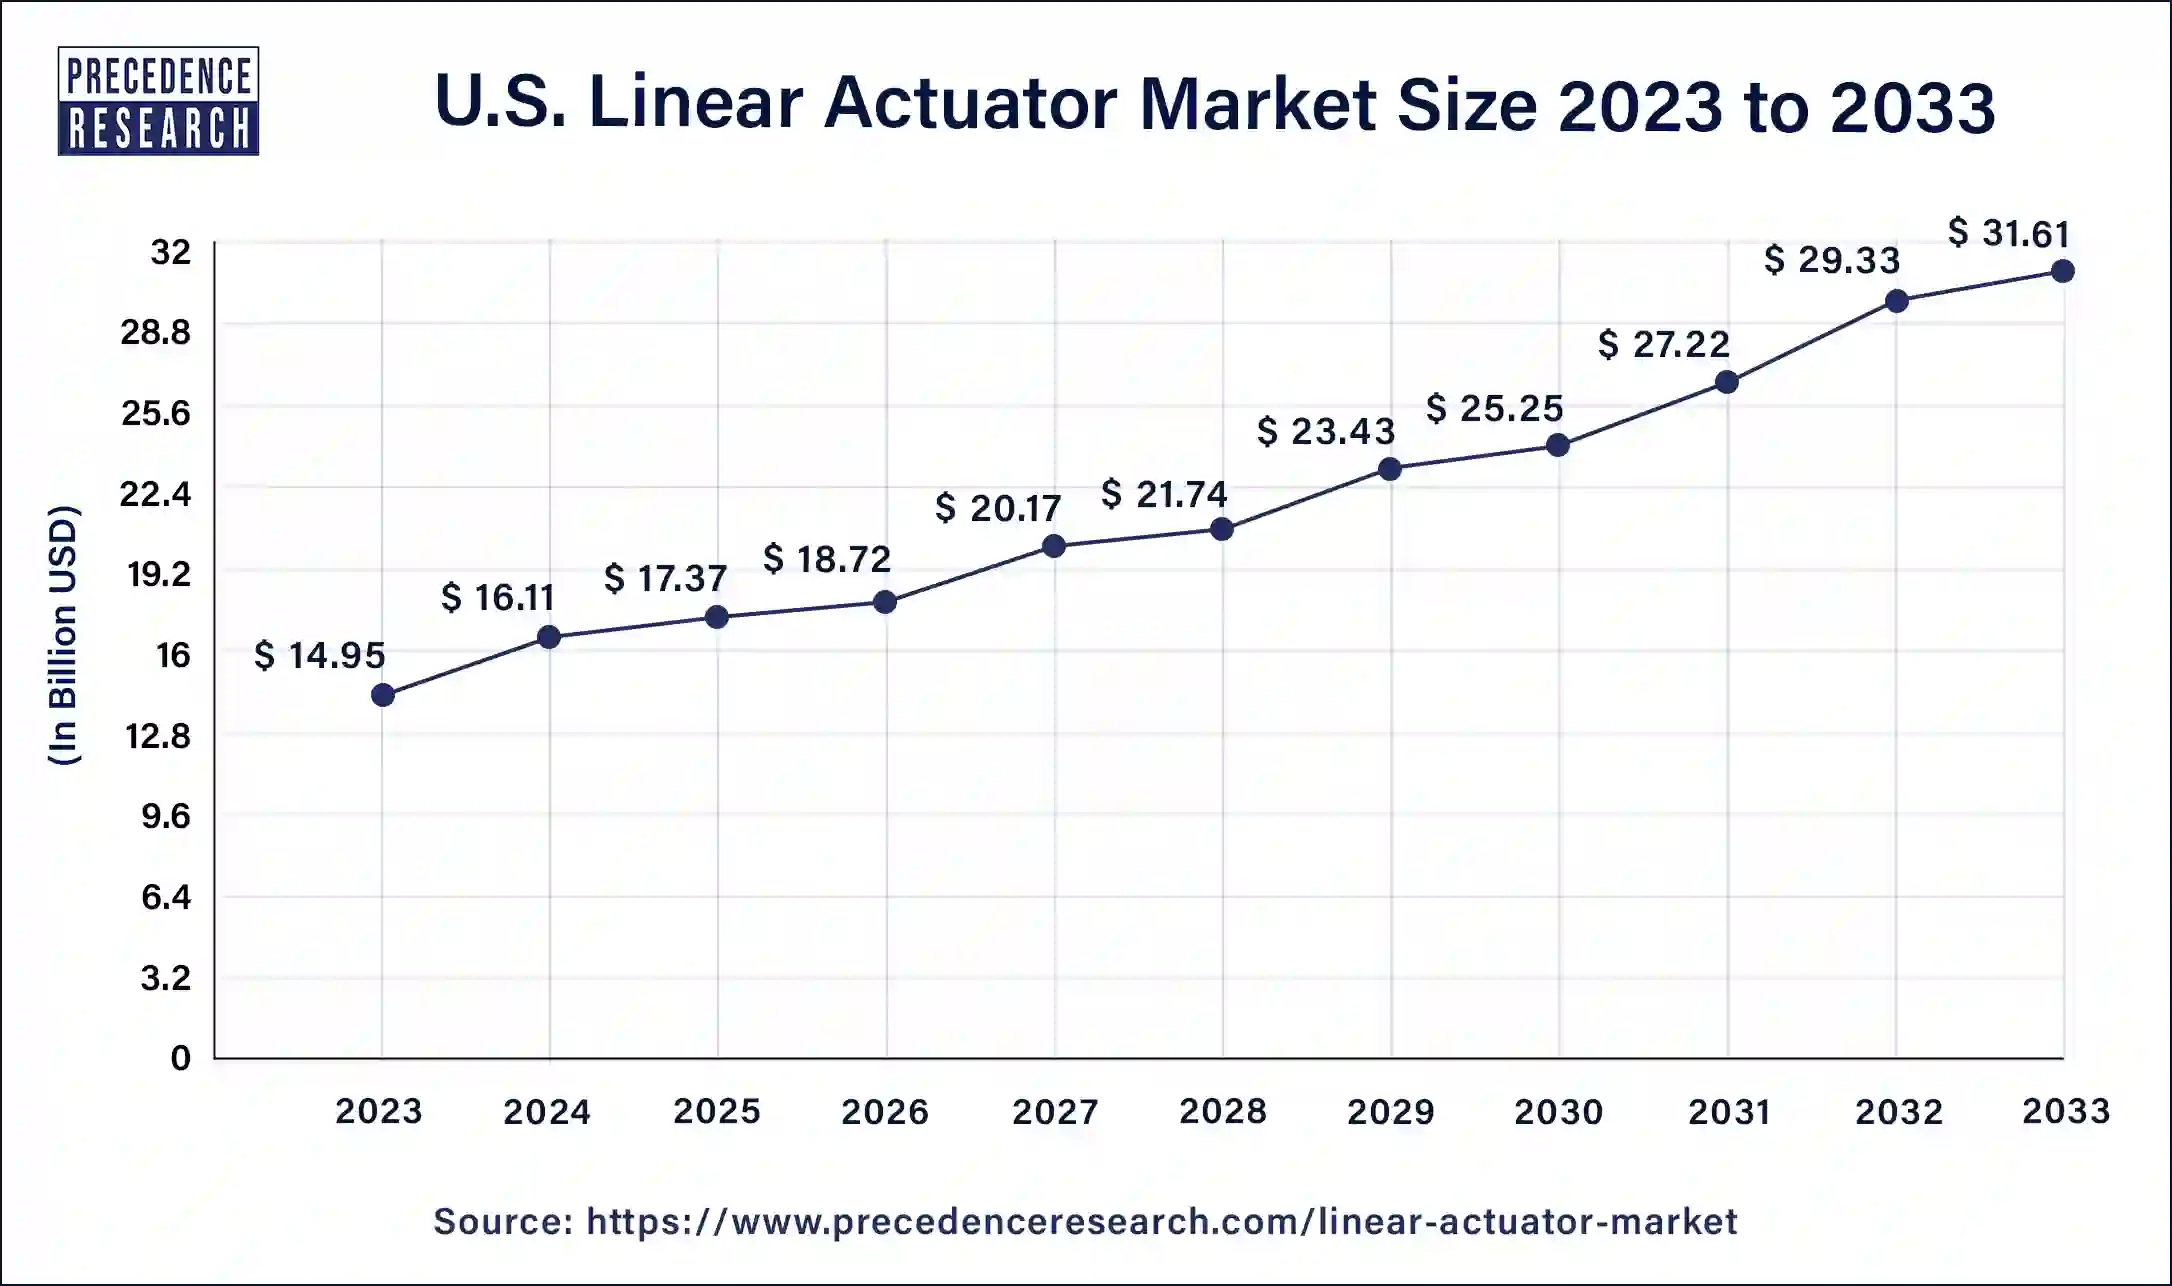 U.S. Linear Actuator Market Size 2024 to 2033